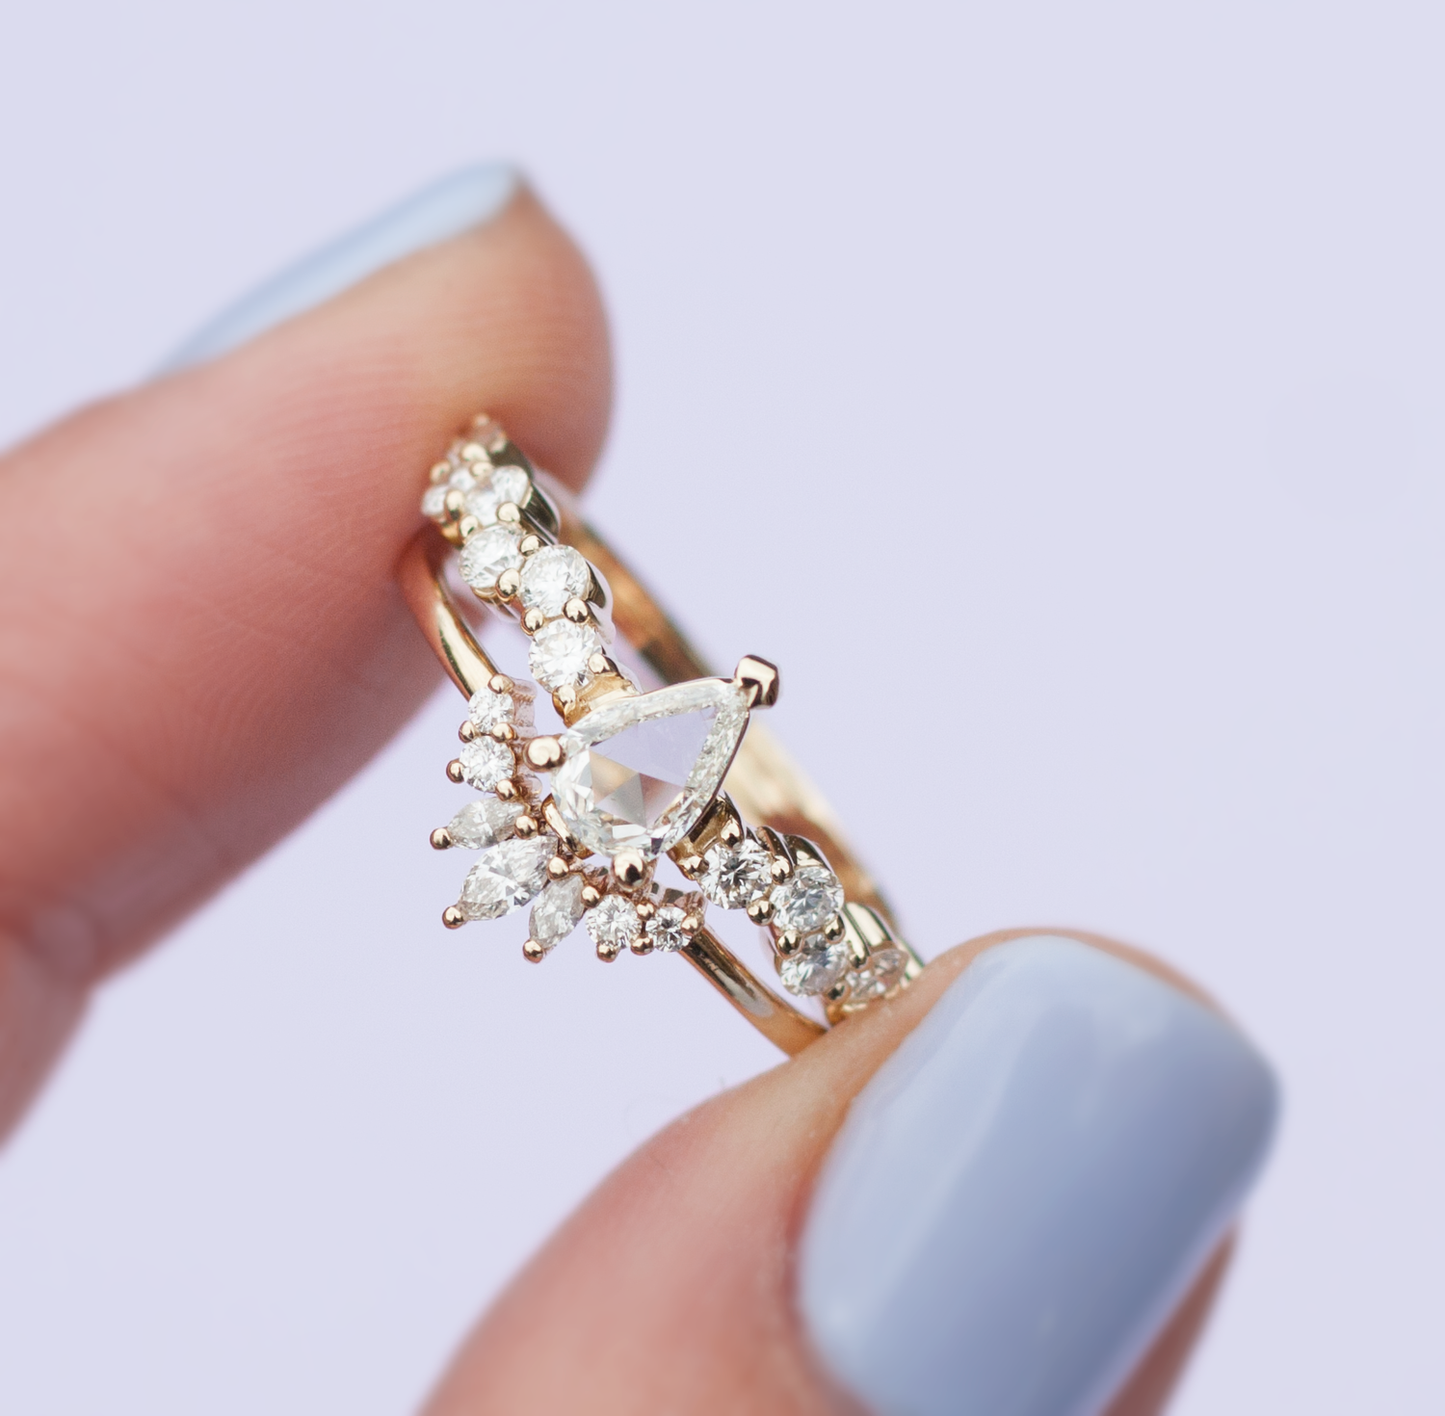 Load image into Gallery viewer, Hand holding the white diamond intertwine ring stacked with a white diamond crown band, close up.
